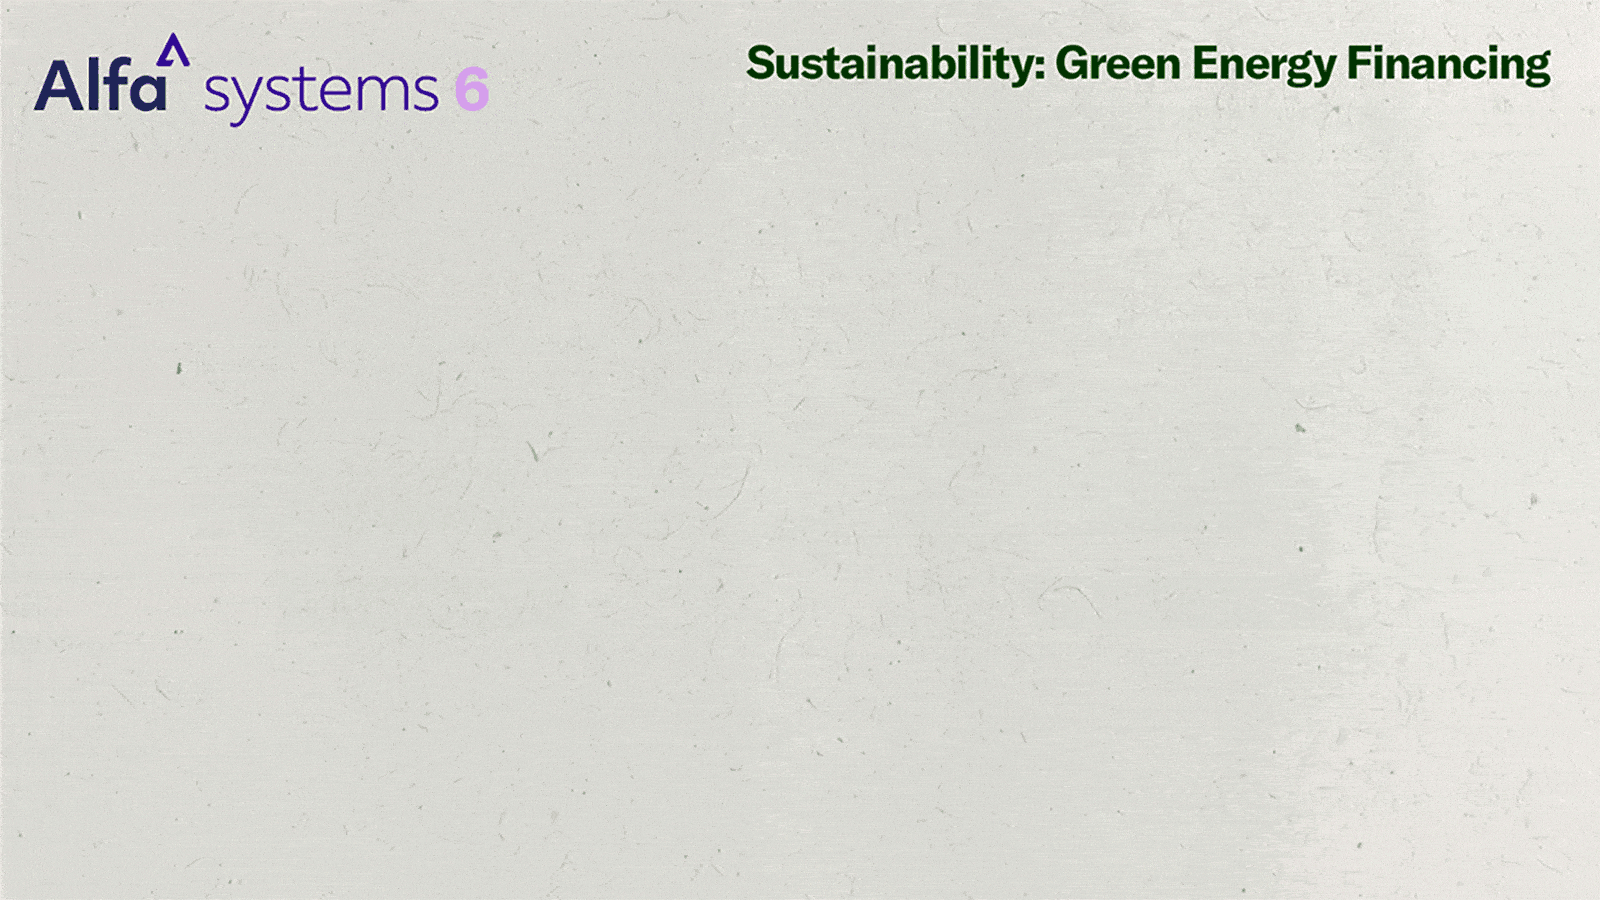 A representation of how Alfa Systems 6 satisfies green energy financing requirements